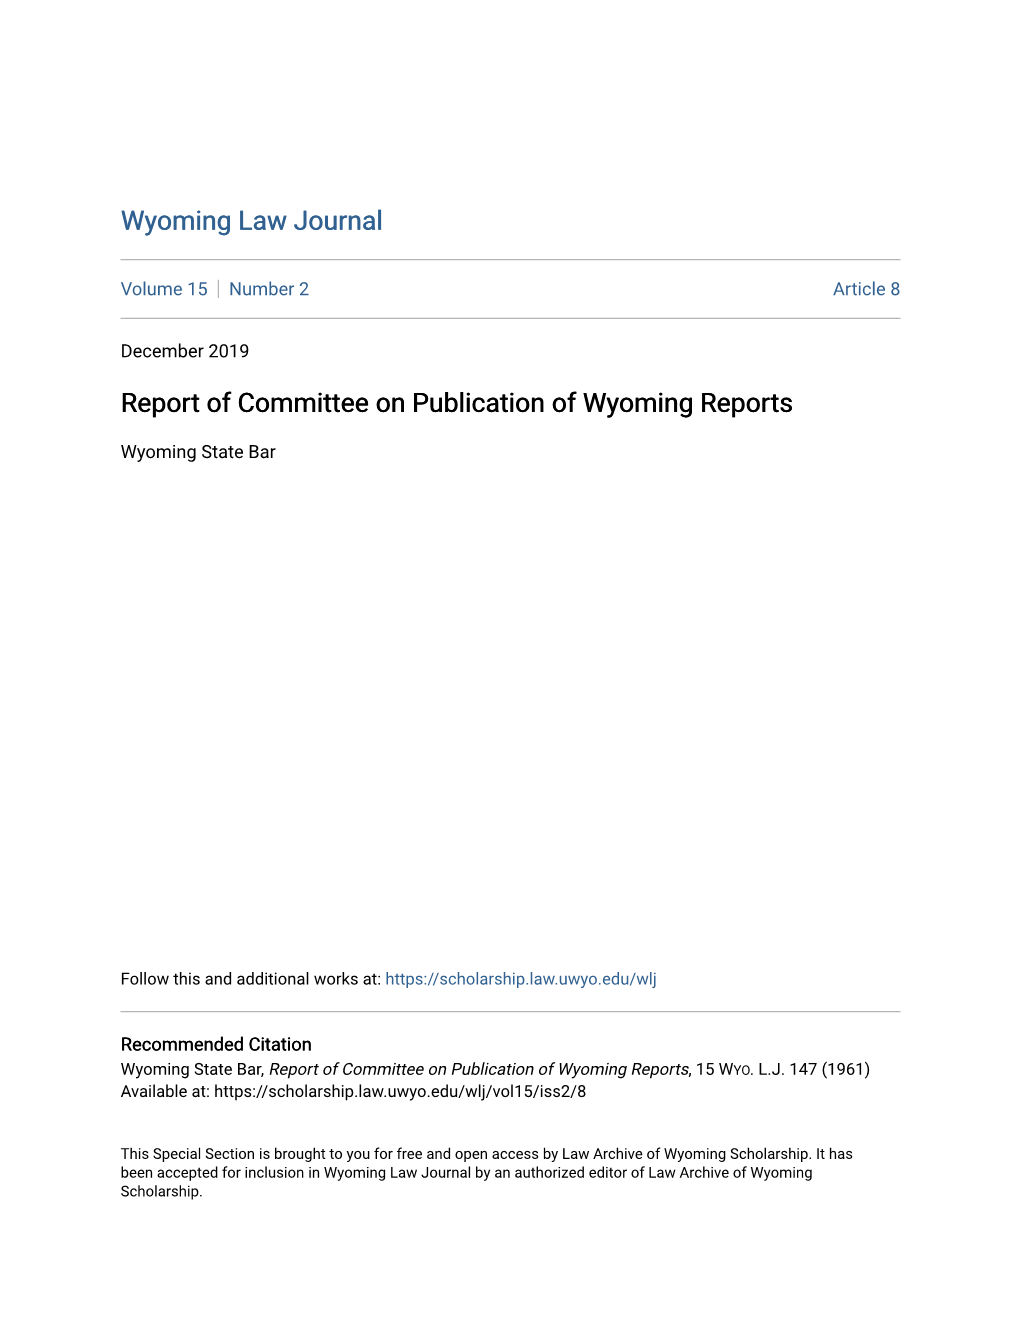 Report of Committee on Publication of Wyoming Reports